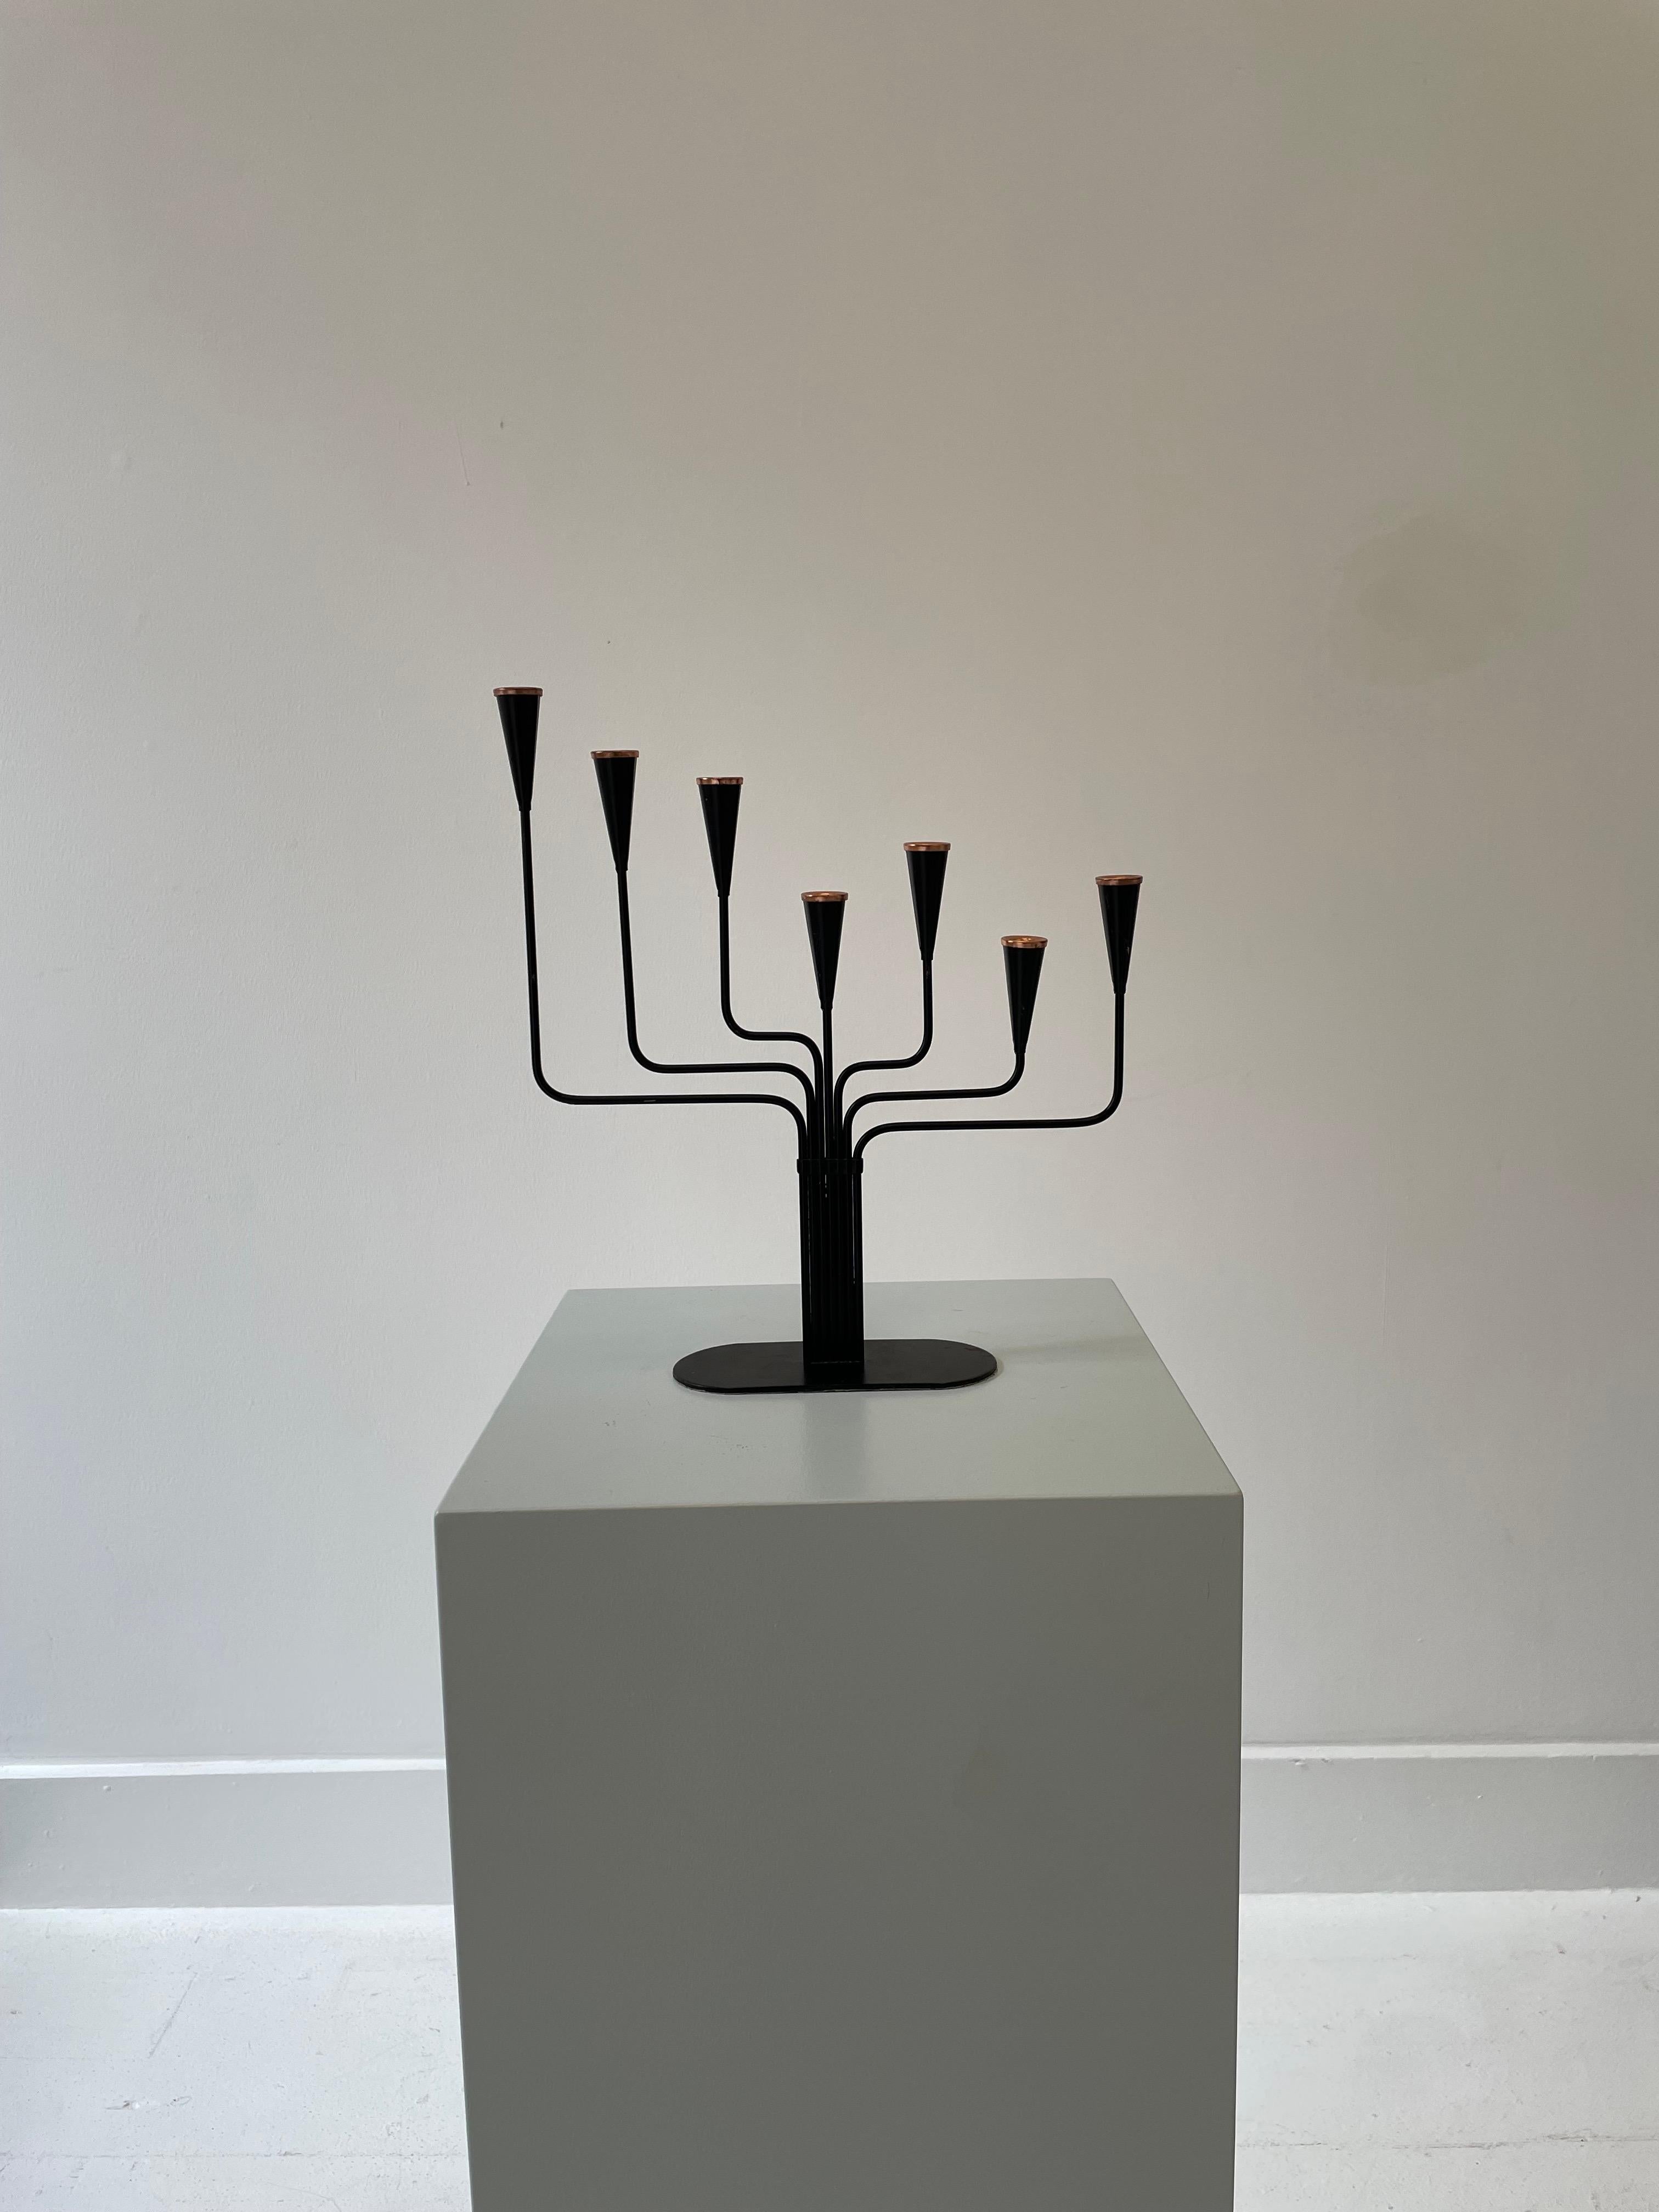 Height: 28cm
Width: 28cm
Depth: 6cm

Designer: Gunnar Ander 
Date: 1950s
Materials: Metal, copper

Description: The Gunnar Ander Candleholder A is a sleek and minimalist piece designed by Swedish designer Gunnar Ander. Crafted in the mid-20th